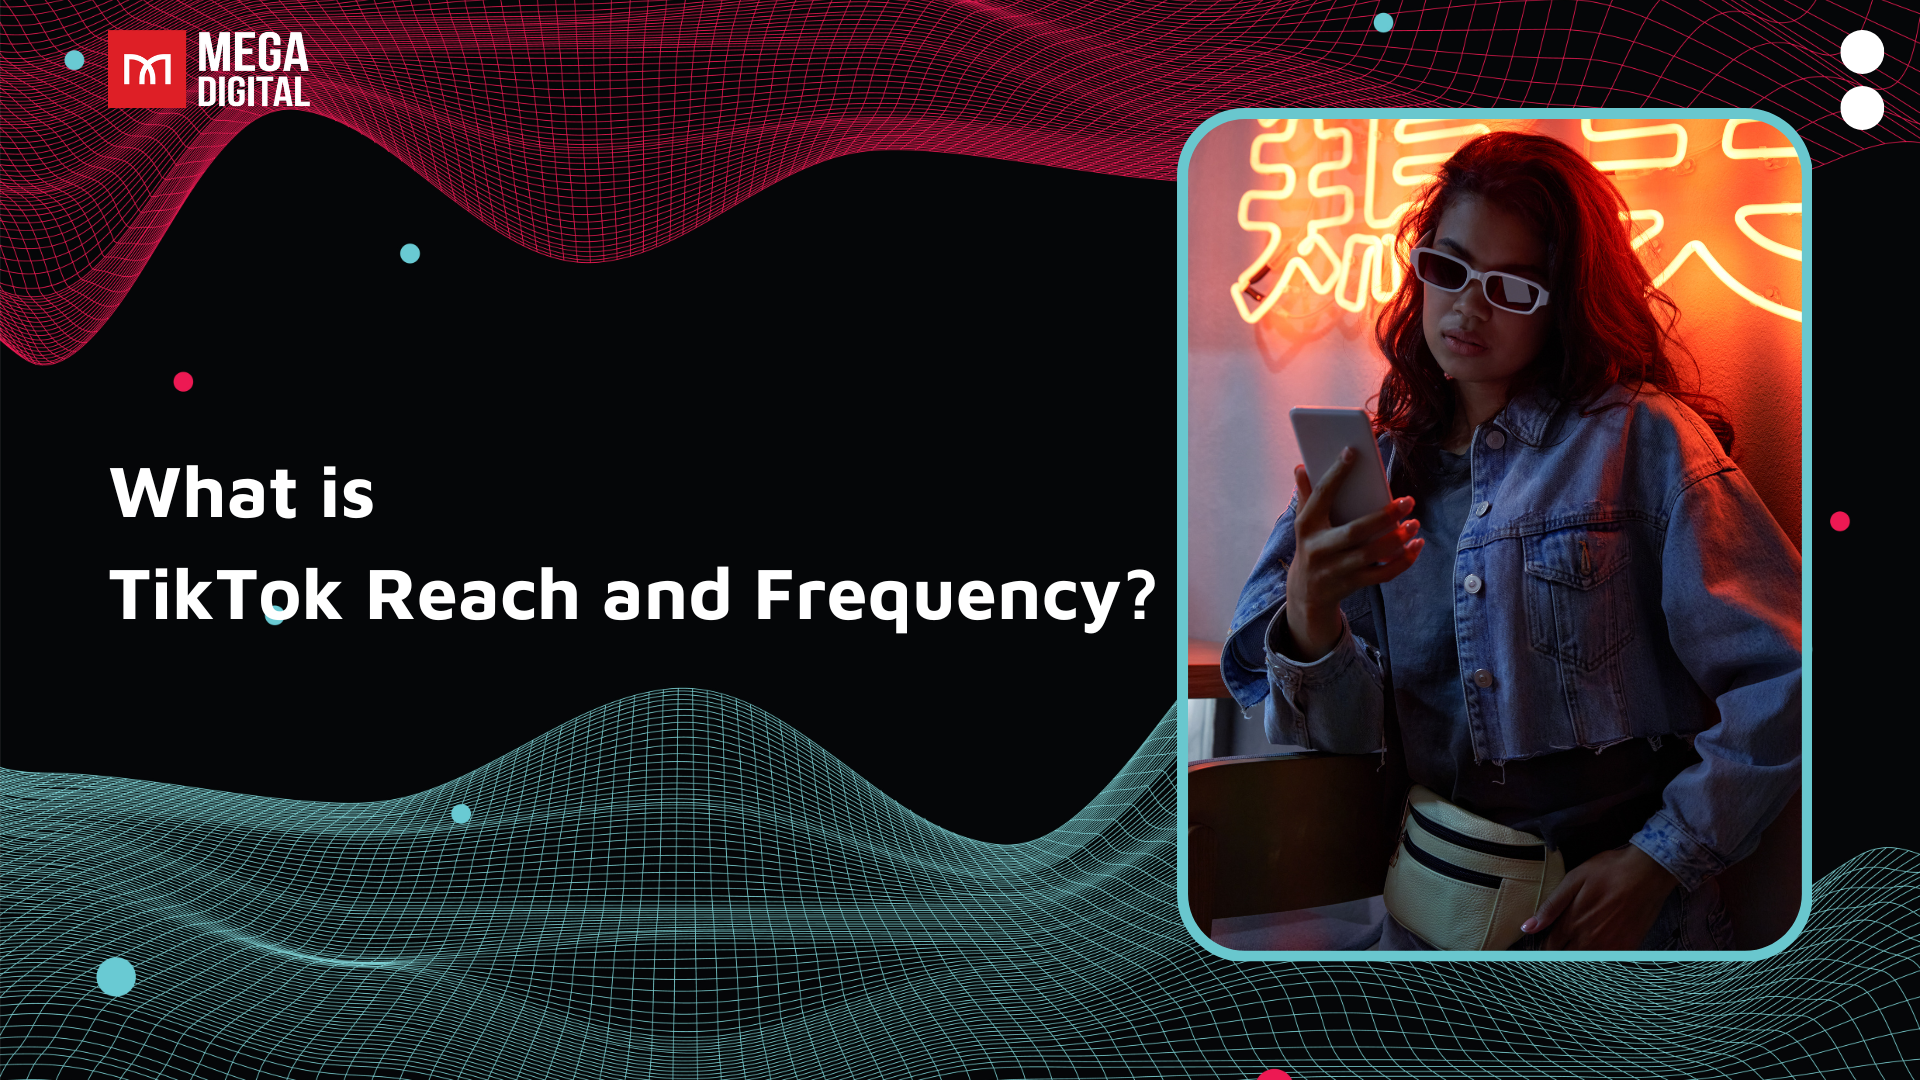 What is TikTok Reach and Frequency ads?